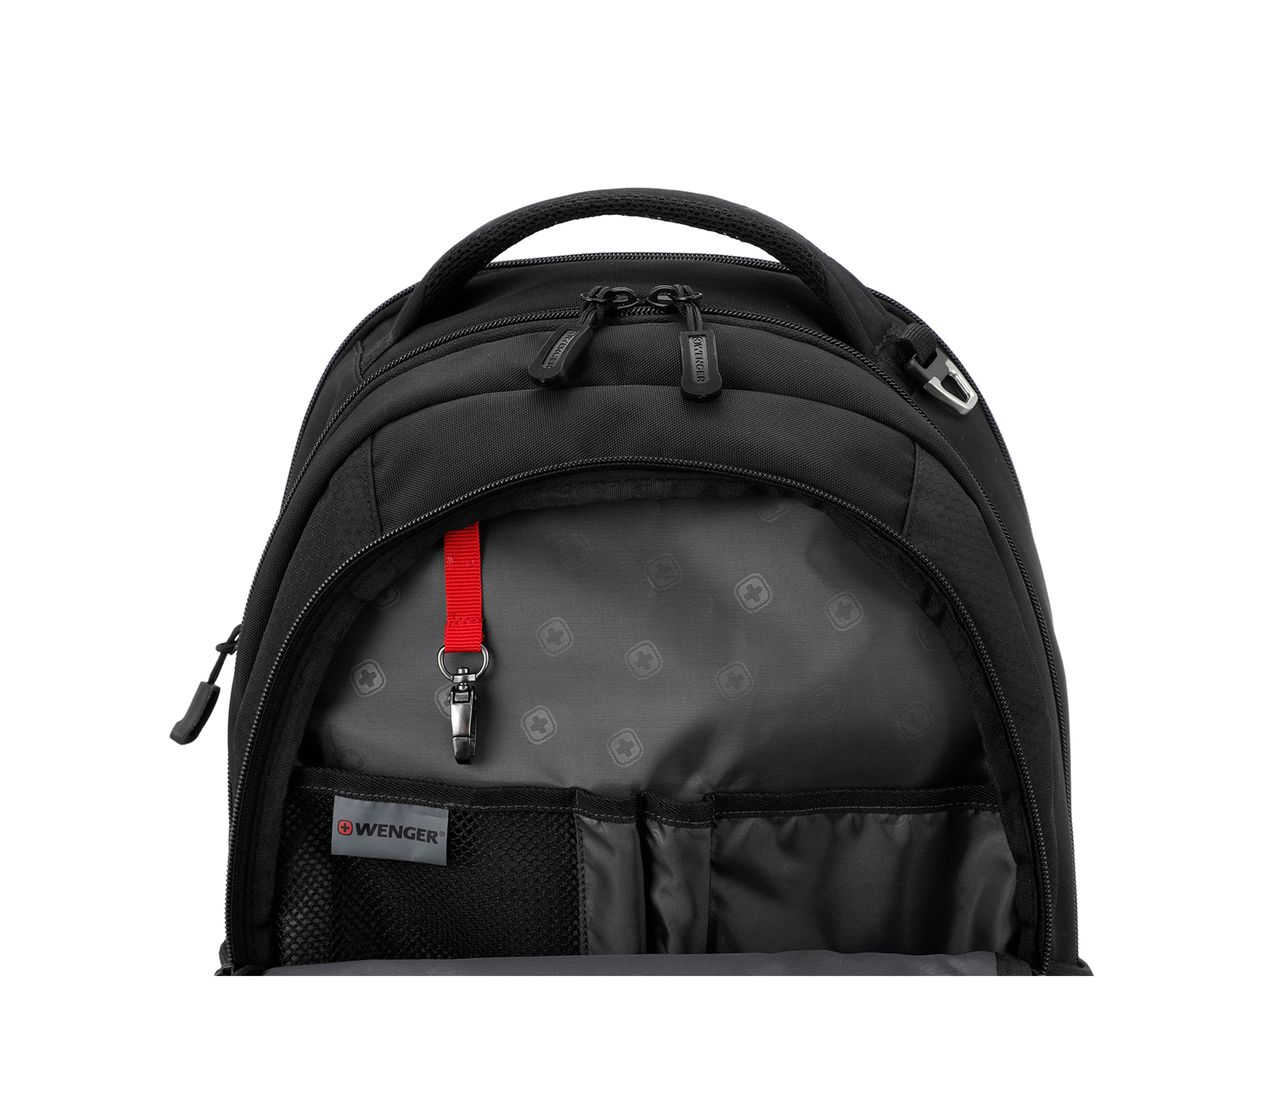 Laptop and Tablet Backpack-610660